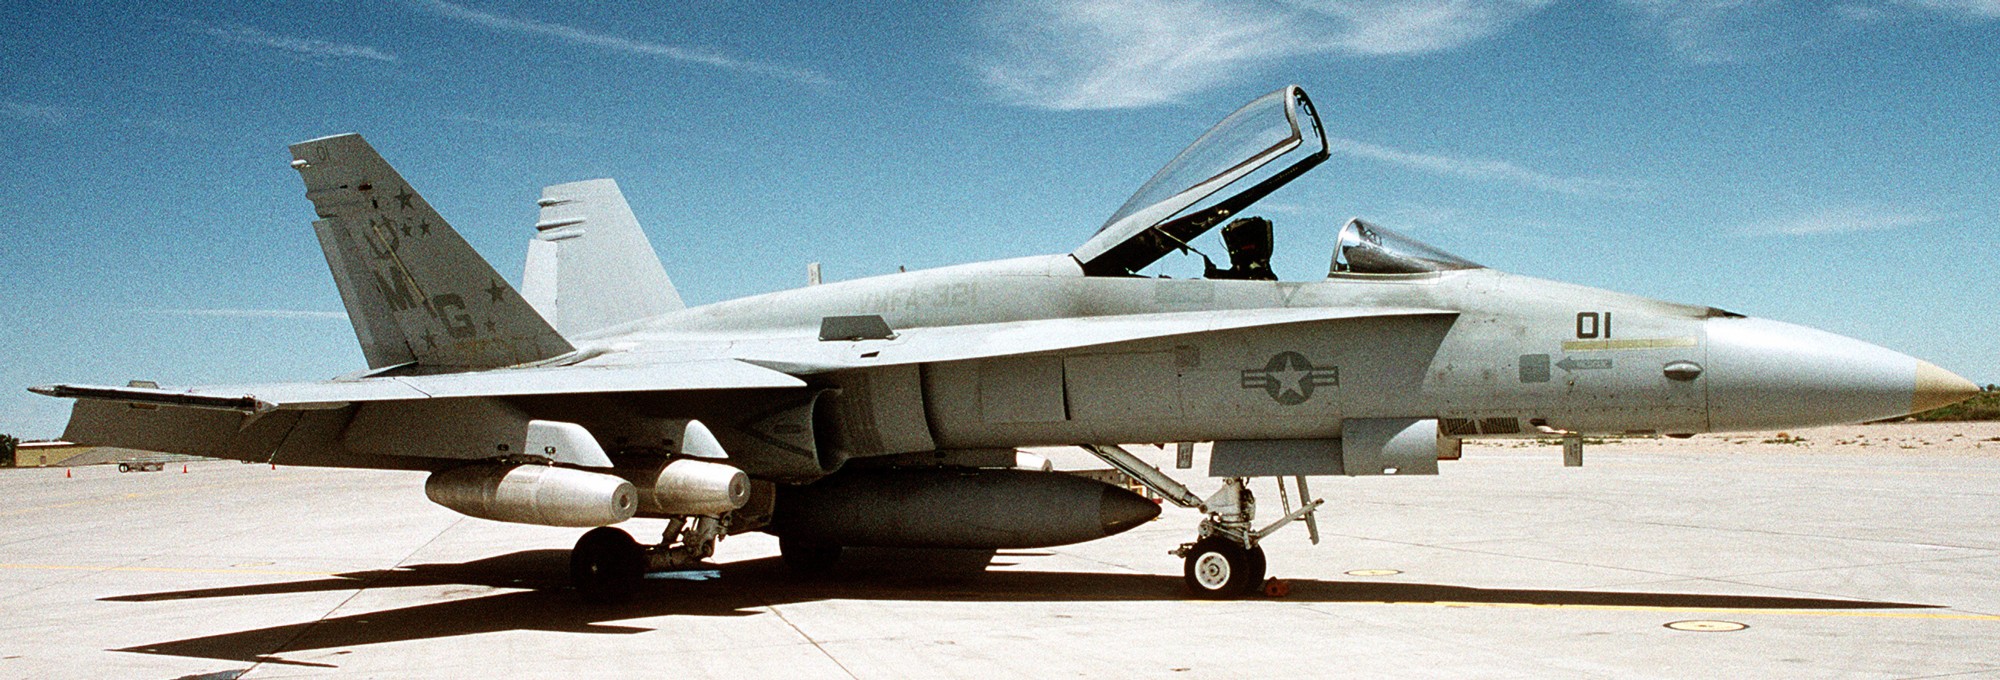 vmfa-321 hell's angels marine fighter attack squadron usmc f/a-18a hornet 20 km.77 napalm bomb